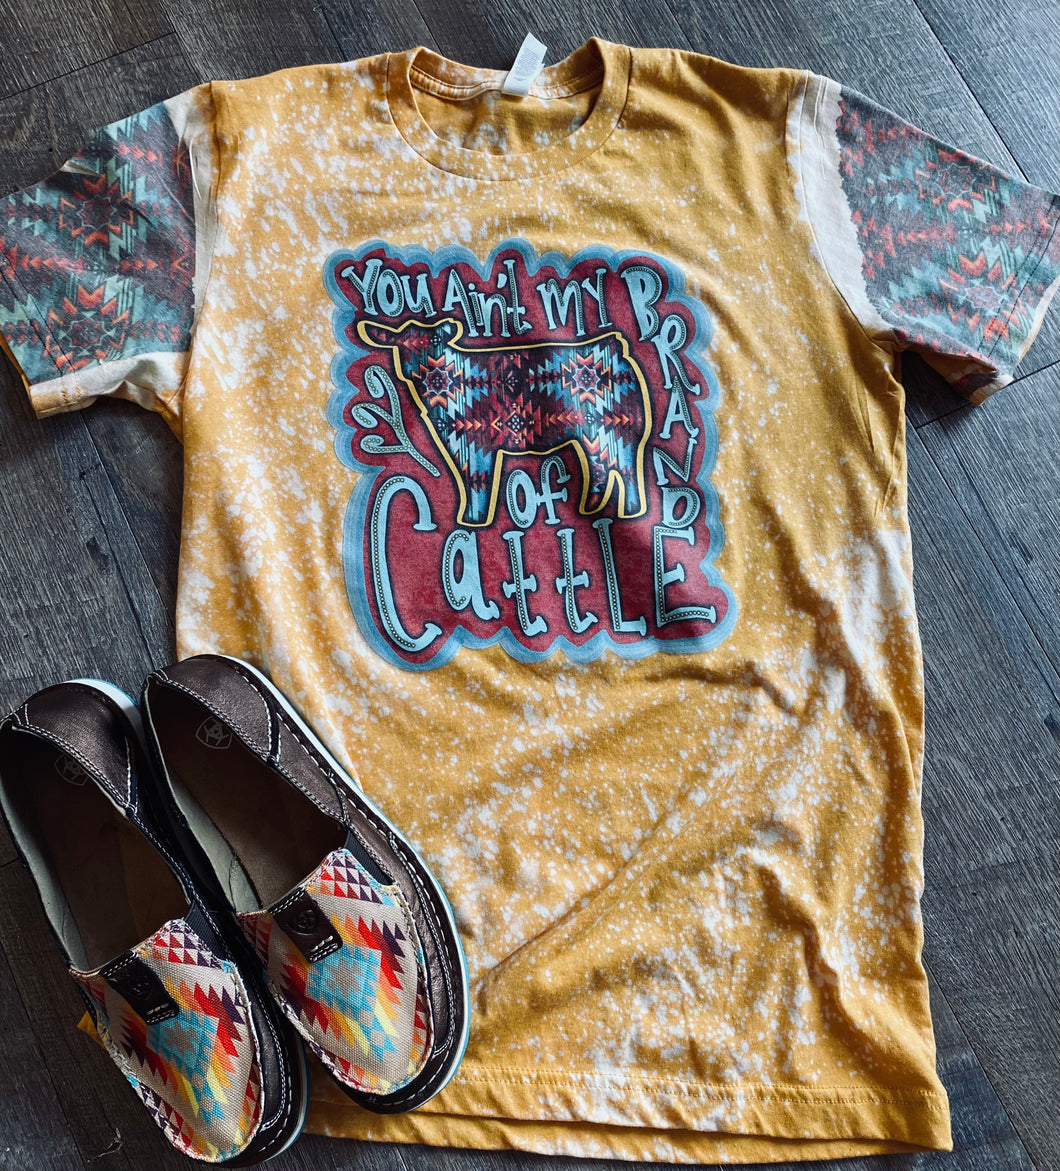 You ain’t my brand of cattle with Aztec sleeves mustard bleached graphic tee - Mavictoria Designs Hot Press Express